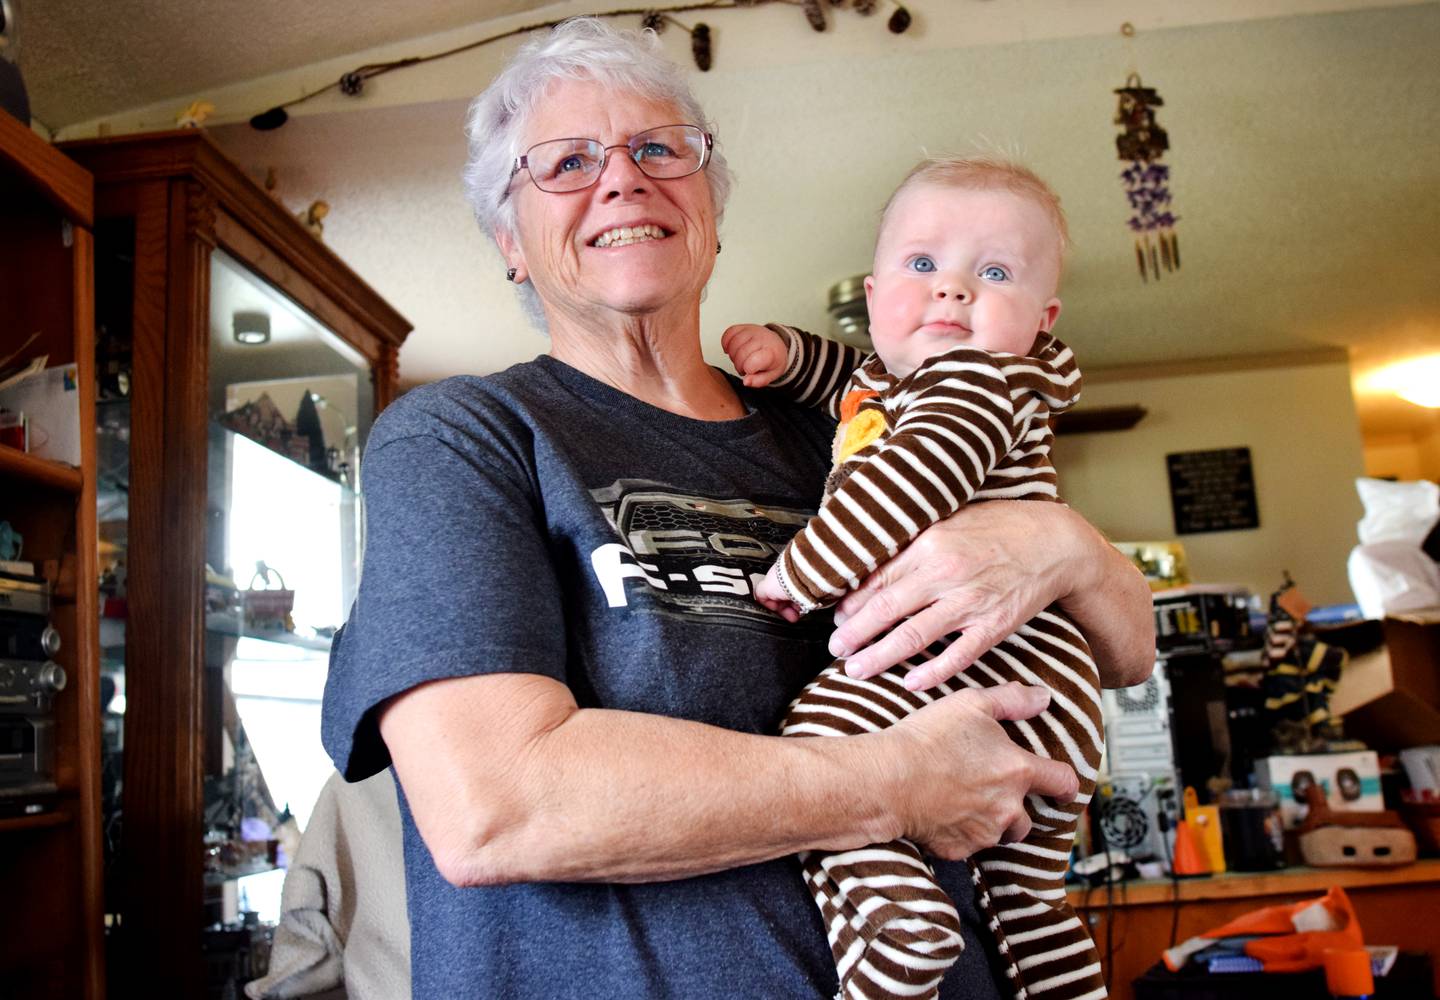 Pam Olson, a Democratic candidate running for a seat on the Jasper County Board of Supervisors, holds 6-month-old Mason while watching an episode of "Cocomelon" on Netflix inside her home on Nov. 8 in Newton.